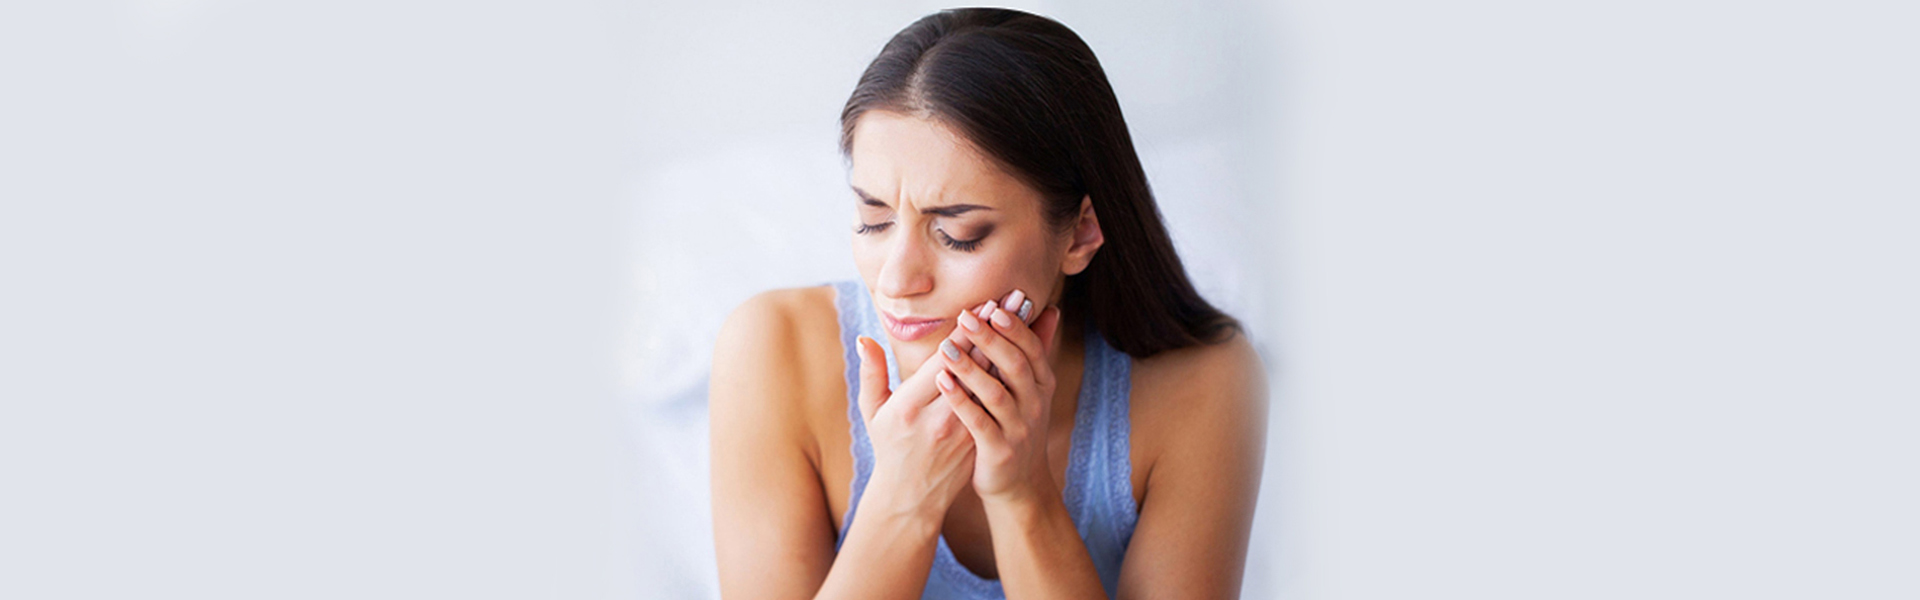 Diet and Nutrition for TMJ/TMD: A Guide to Helping Jaw Pain